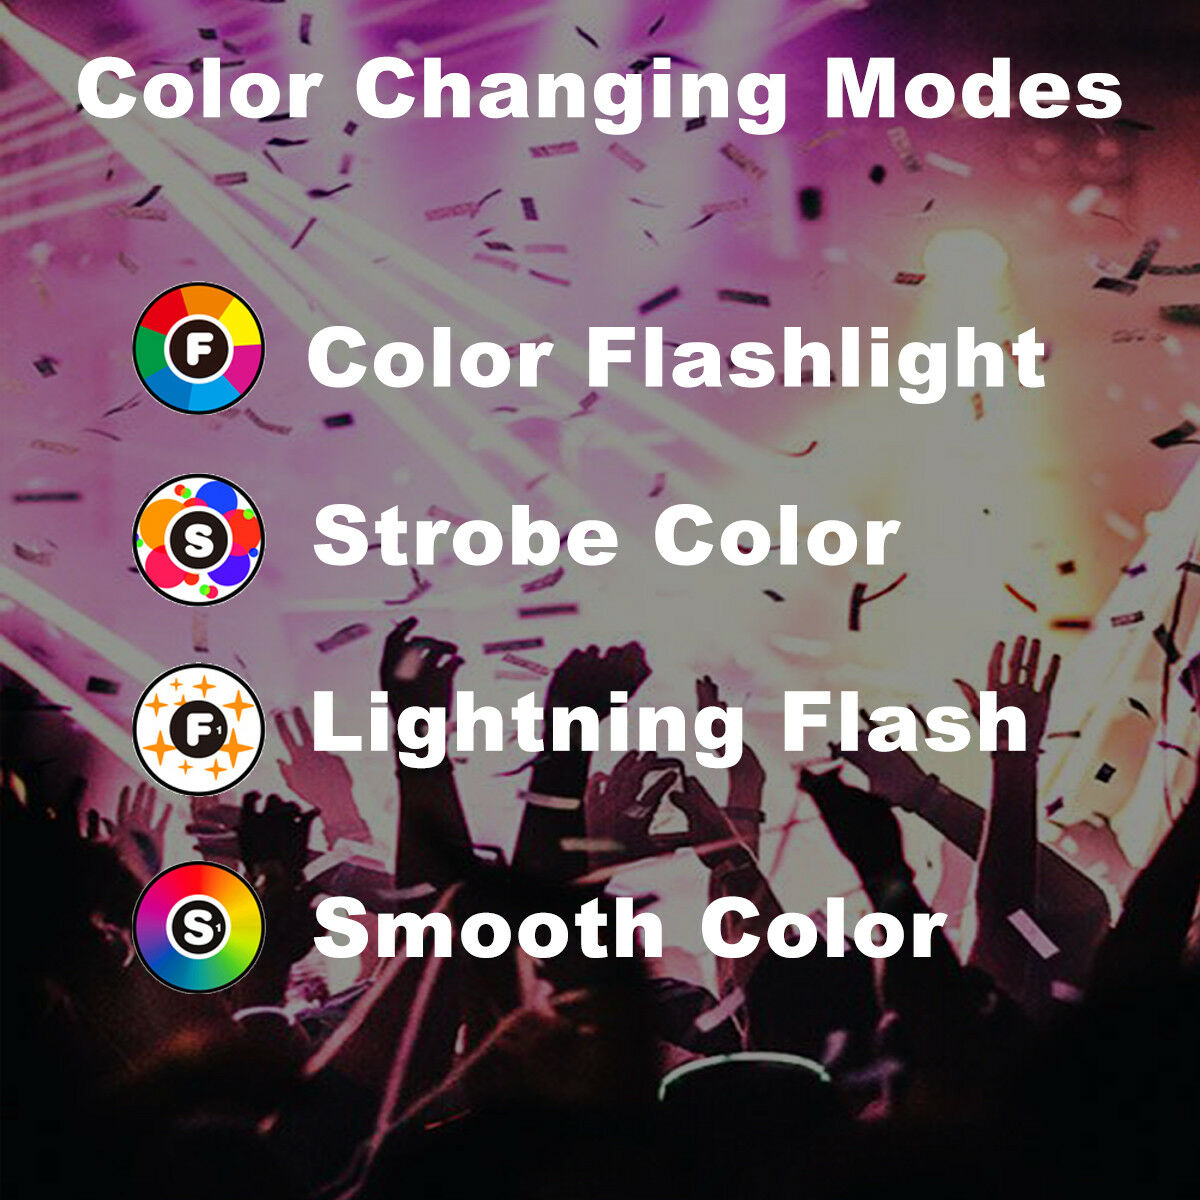 E27 LED Light Bulbs RGB Color Changing 5W A19 Cool White Bulb with Remote 2 Pack